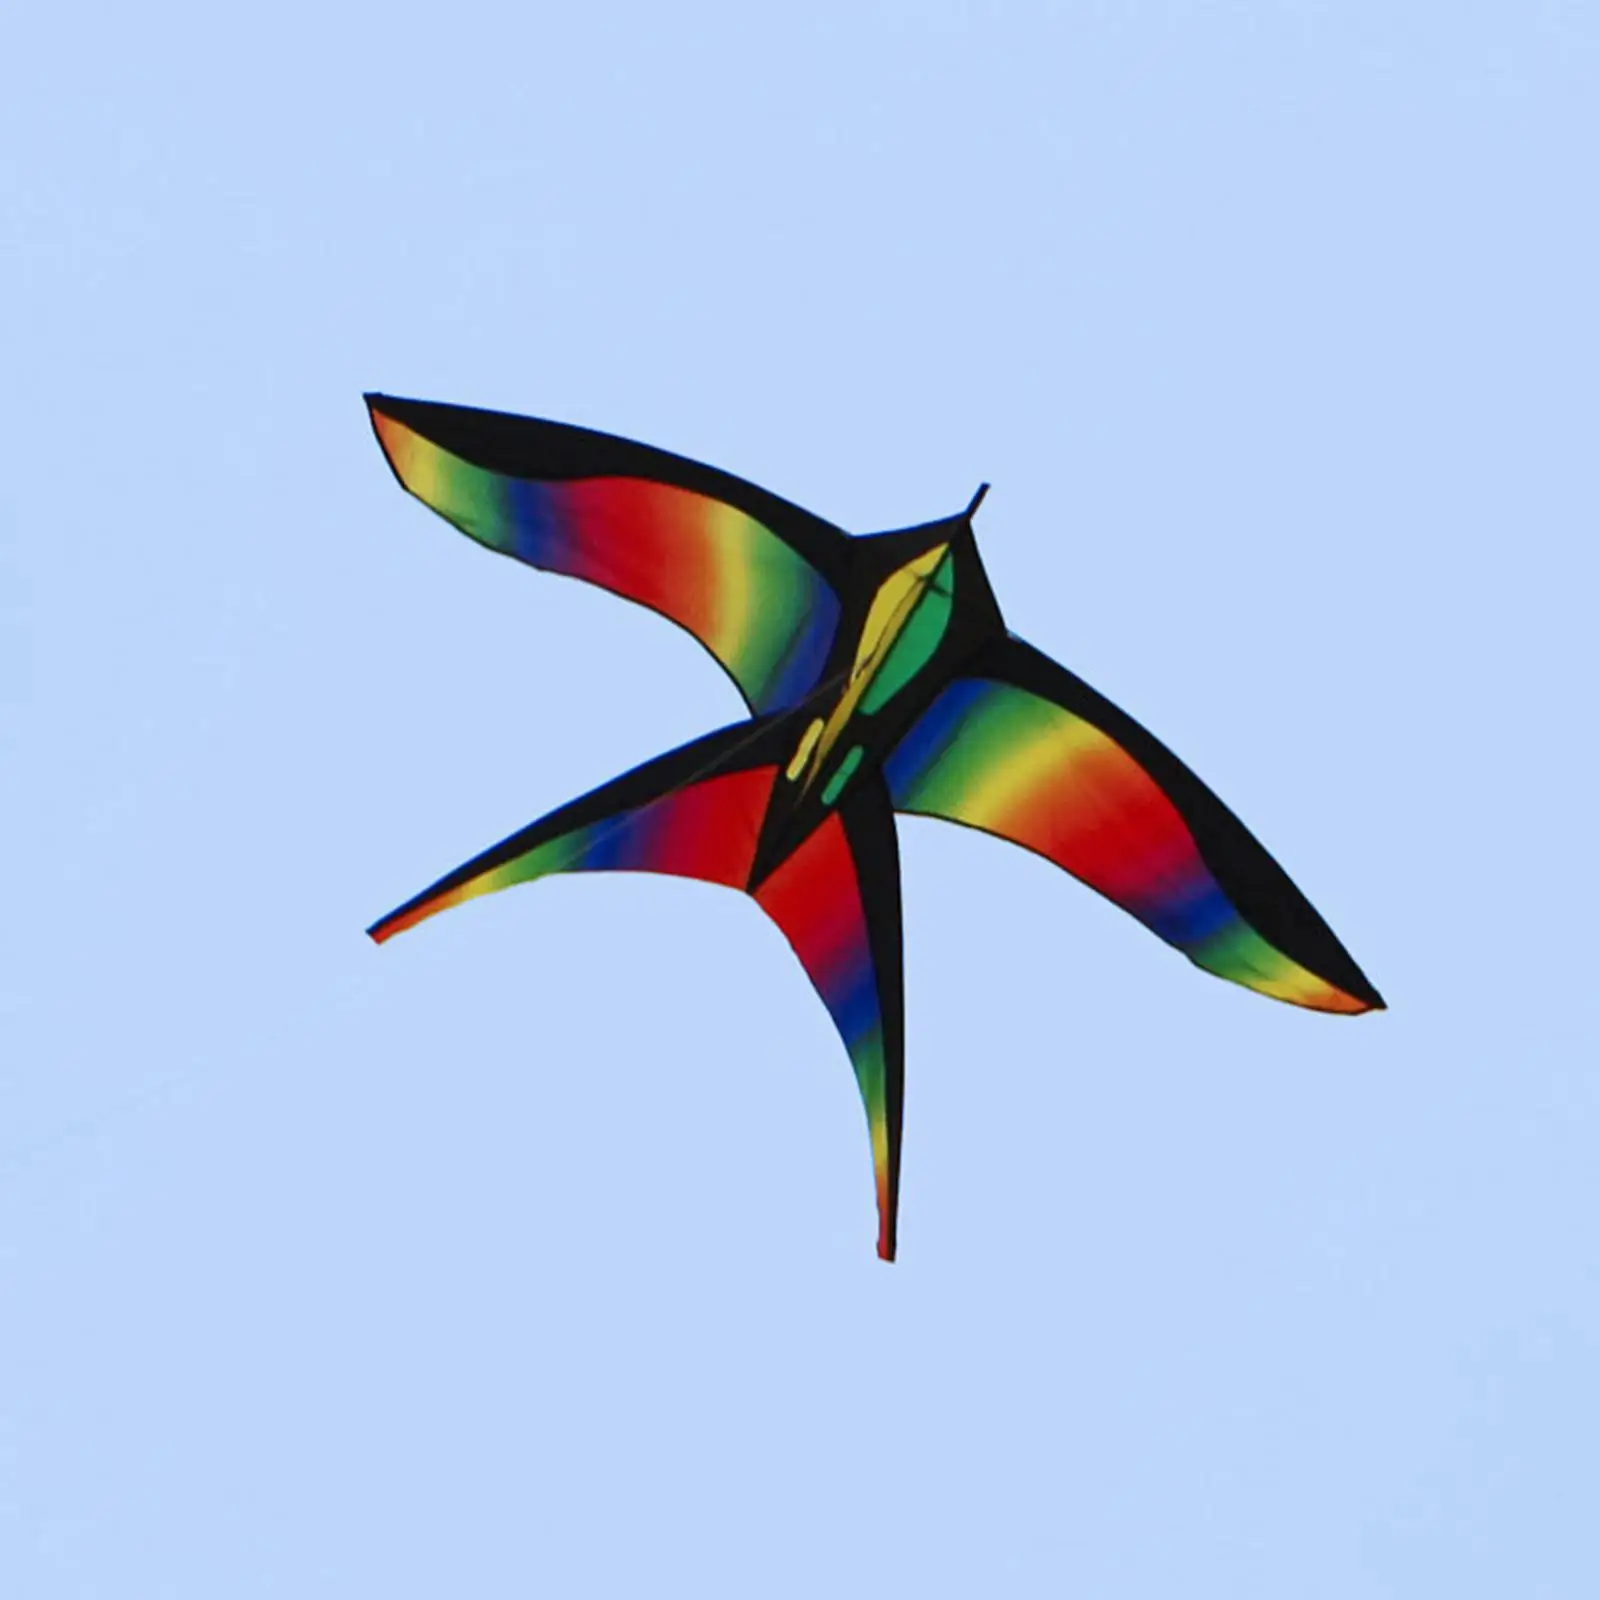 Colorful Bird Kite Swallow Kite with String Large for Sports Beach Games